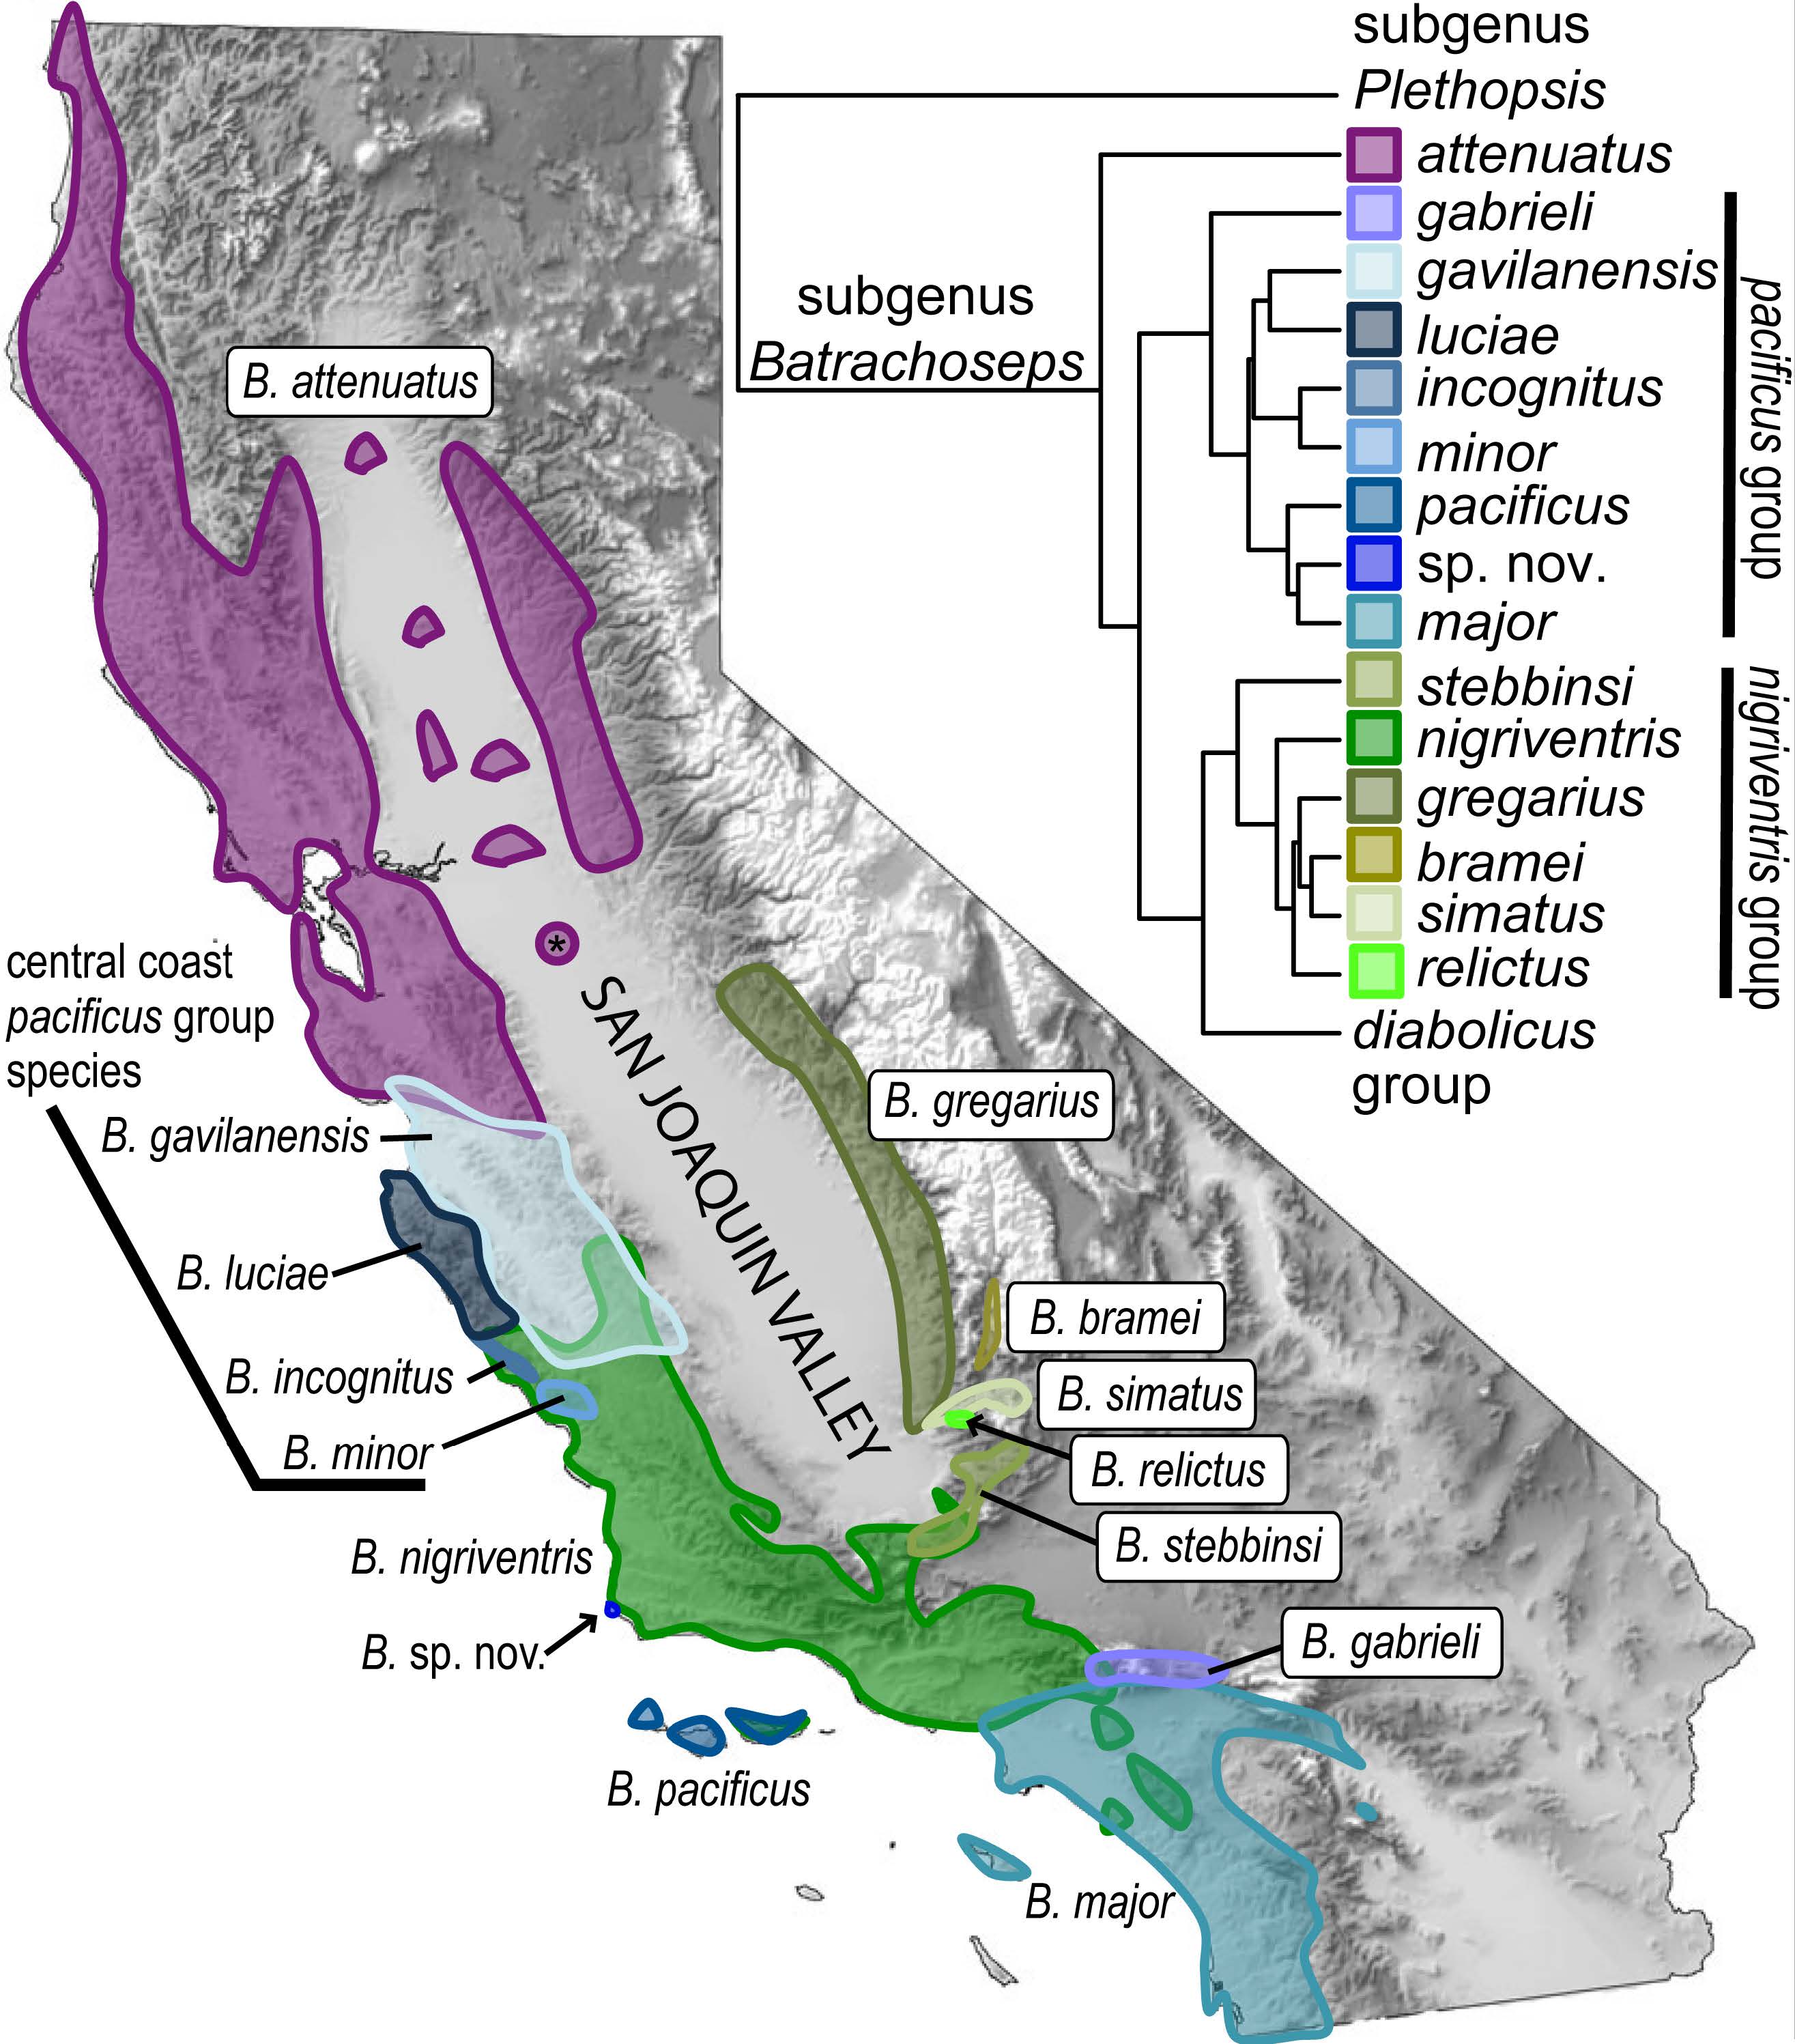 Overview of the genus [I]Batrachoseps[/I]. California map (shaded by elevation) shows ranges of species in the [I]attenuatus[/I], [I]nigriventris[/I] and [I]pacificus[/I] species groups within the state; inset shows the species tree inferred from five nuclear genes. Asterisk indicates the Riverbank population of [I]B. attenuatus[/I], which may have been introduced. The map and tree are modified from [I]Jockusch, Martínez-Solano & Timpe (2015)[/I].